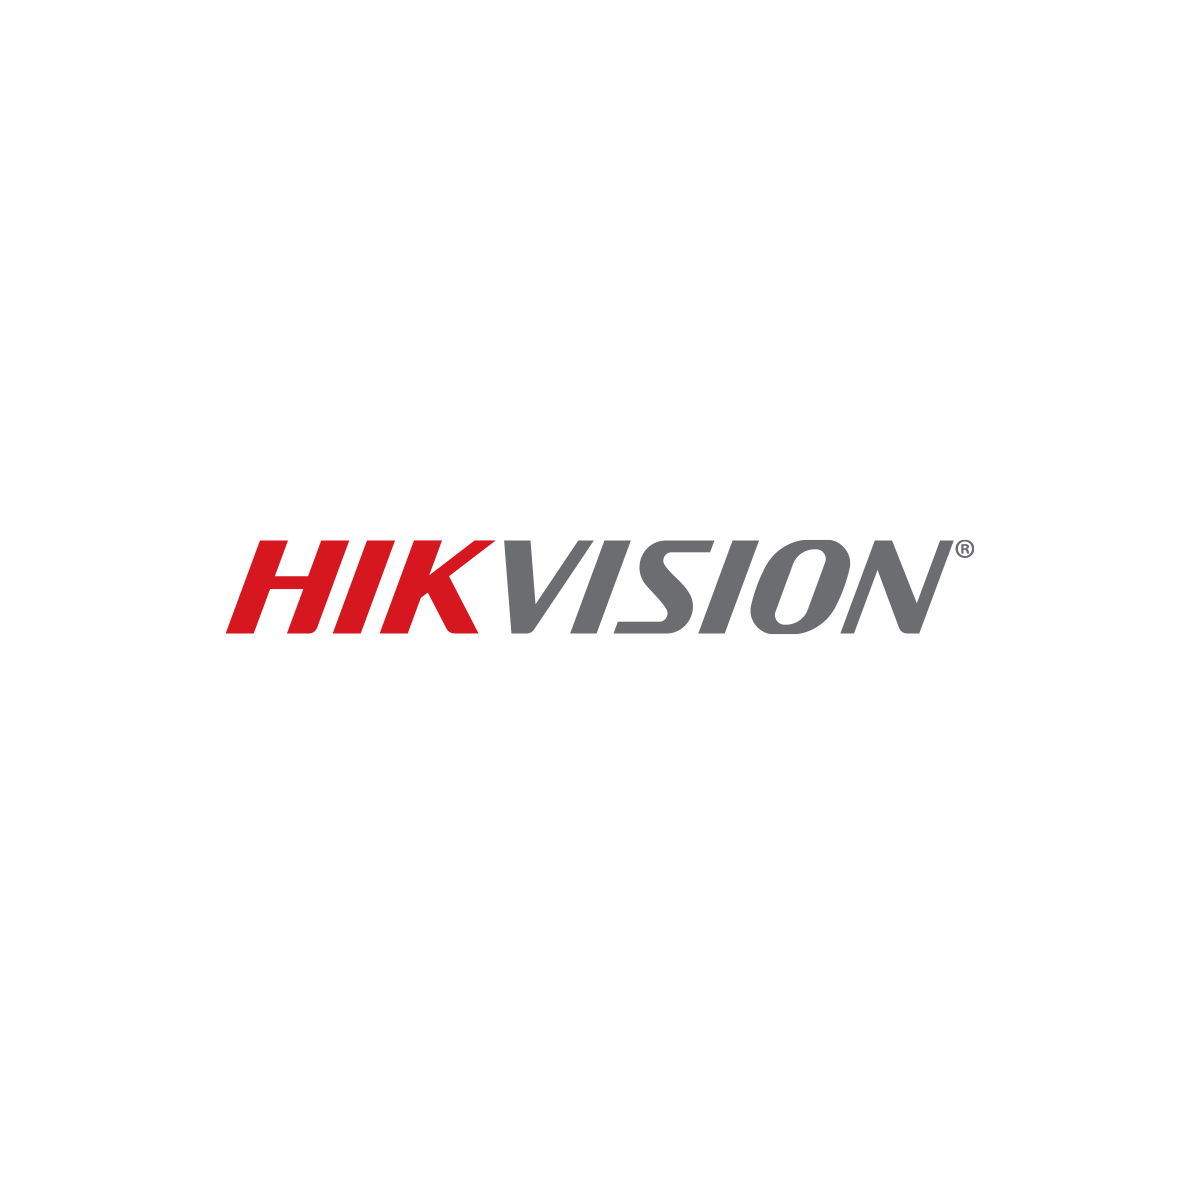 Hikvision and Inkling